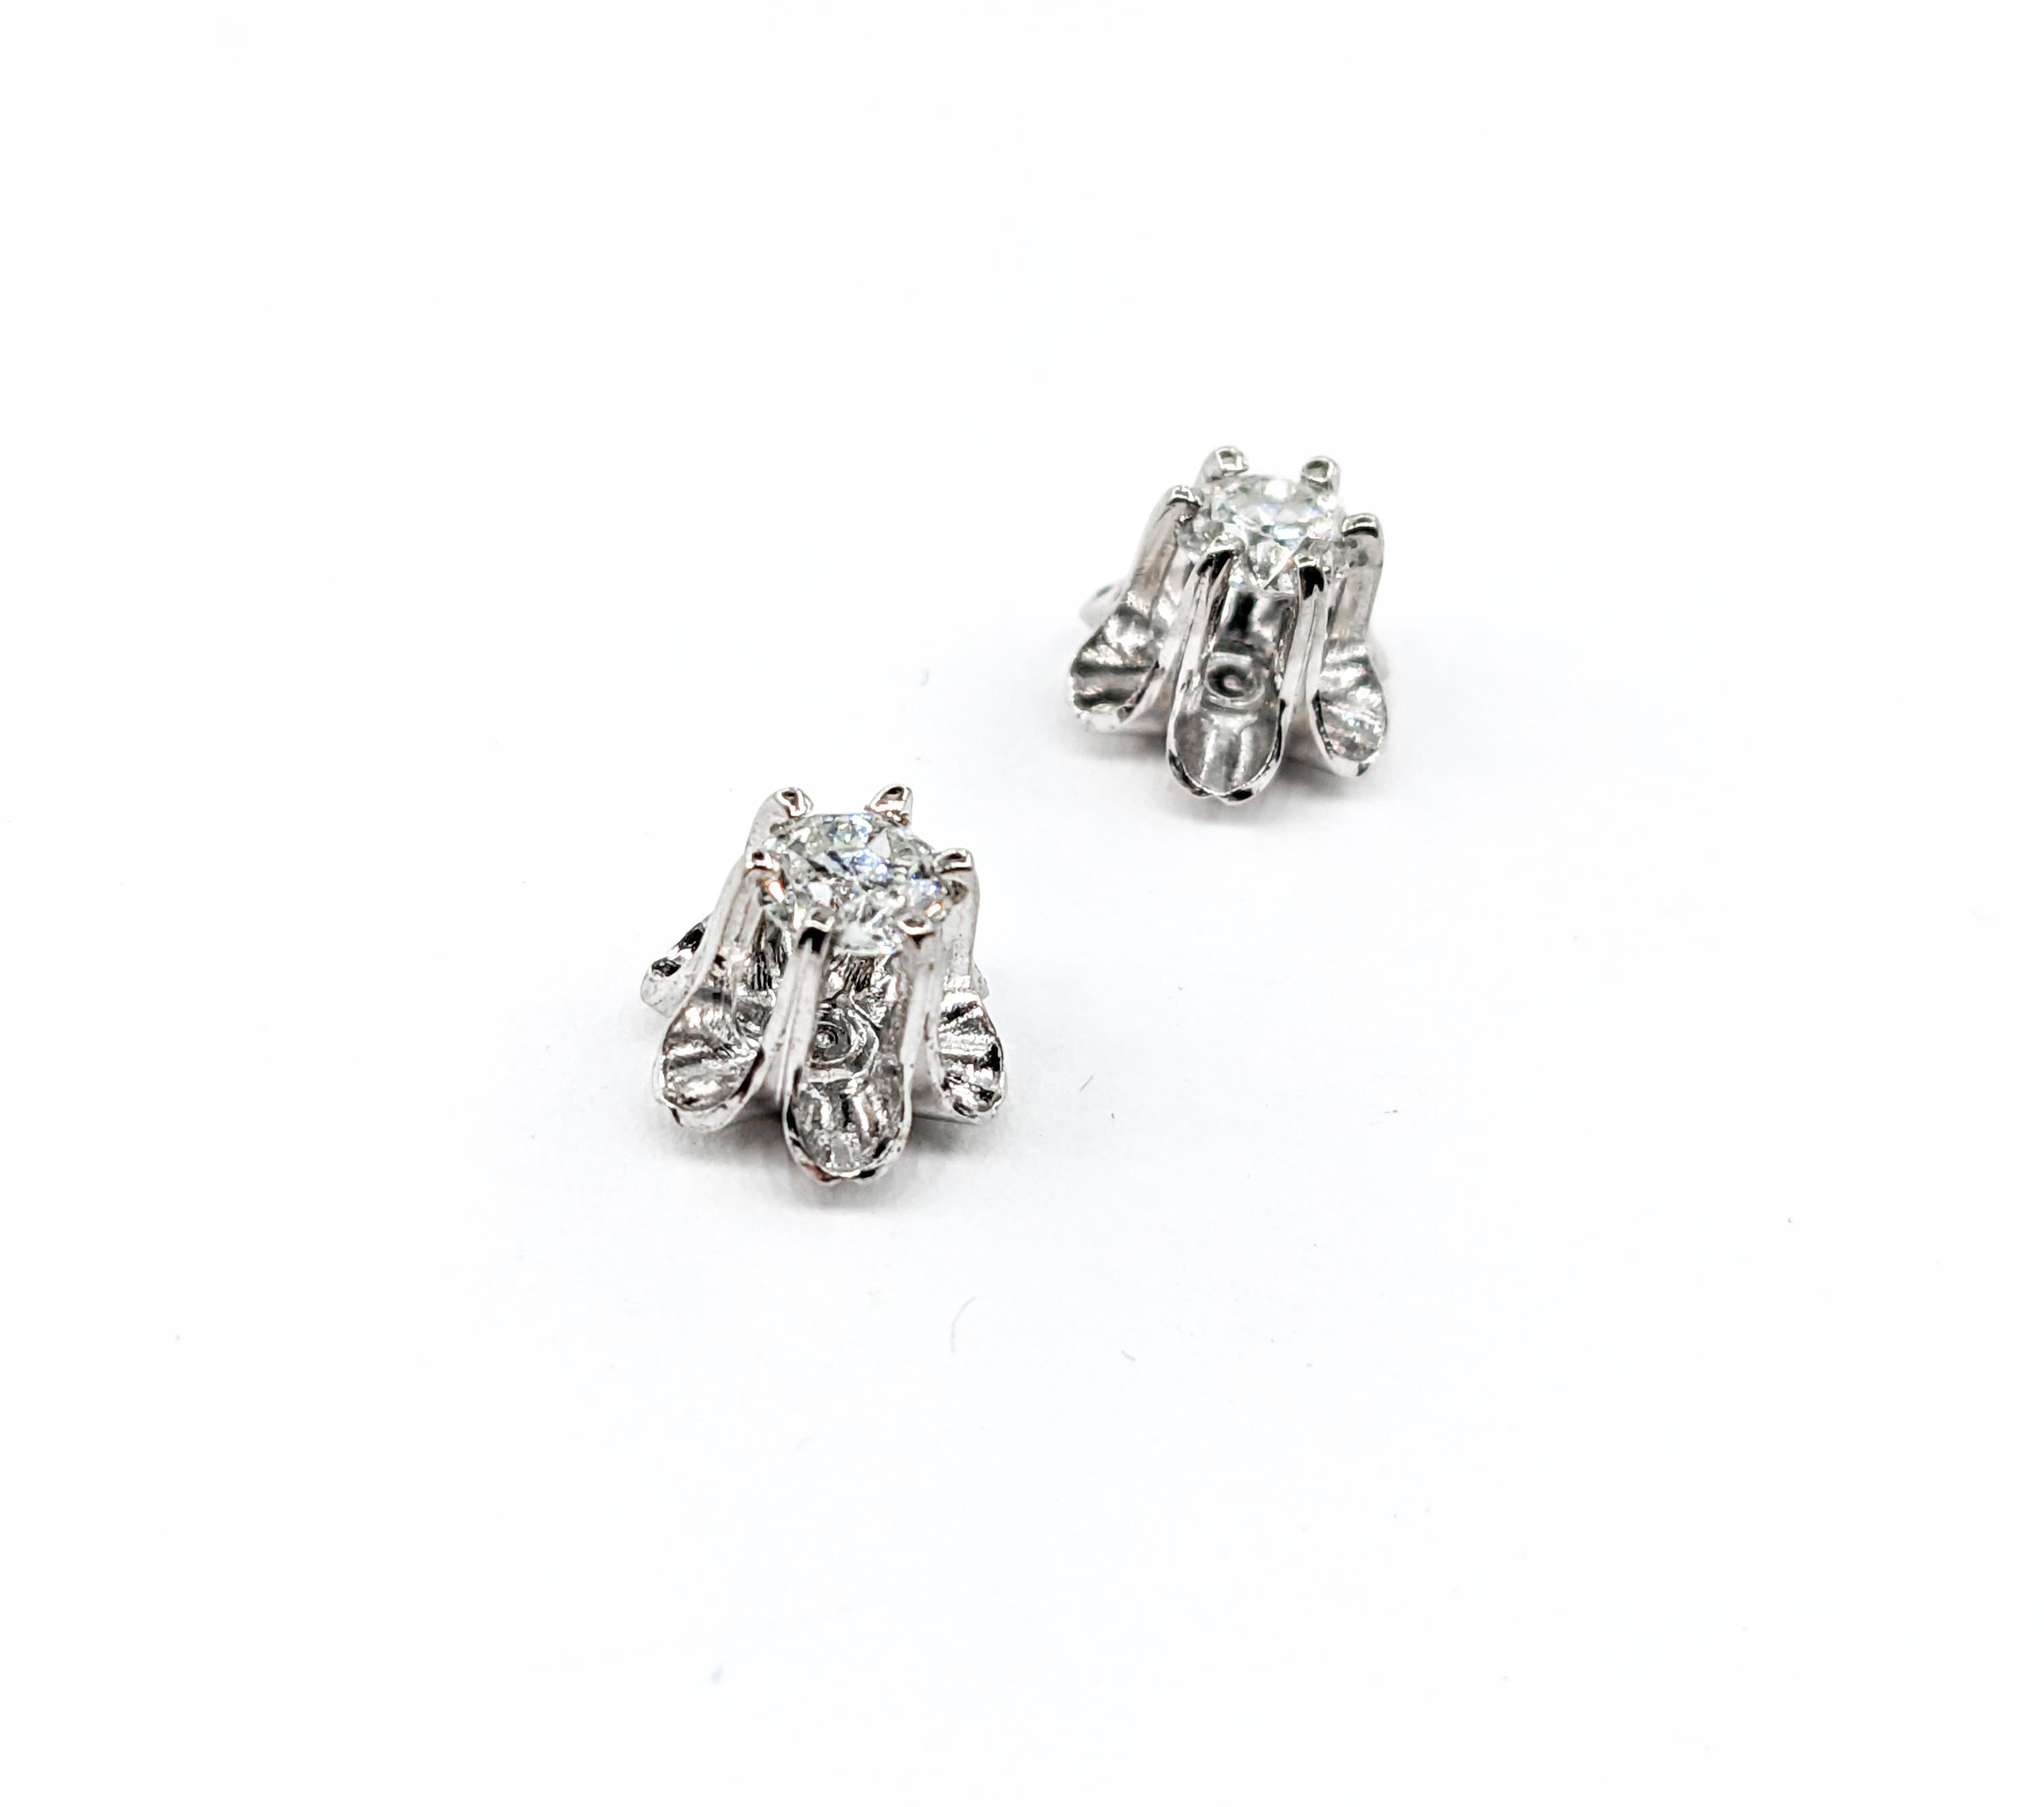 Vintage Old European Buttercup Stud Diamond Earrings In White Gold 

Introducing the timeless elegance of these Buttercup Stud Earrings, beautifully crafted in 14kt white gold. They boast .45ctw of Old European cut diamonds that sparkle with I